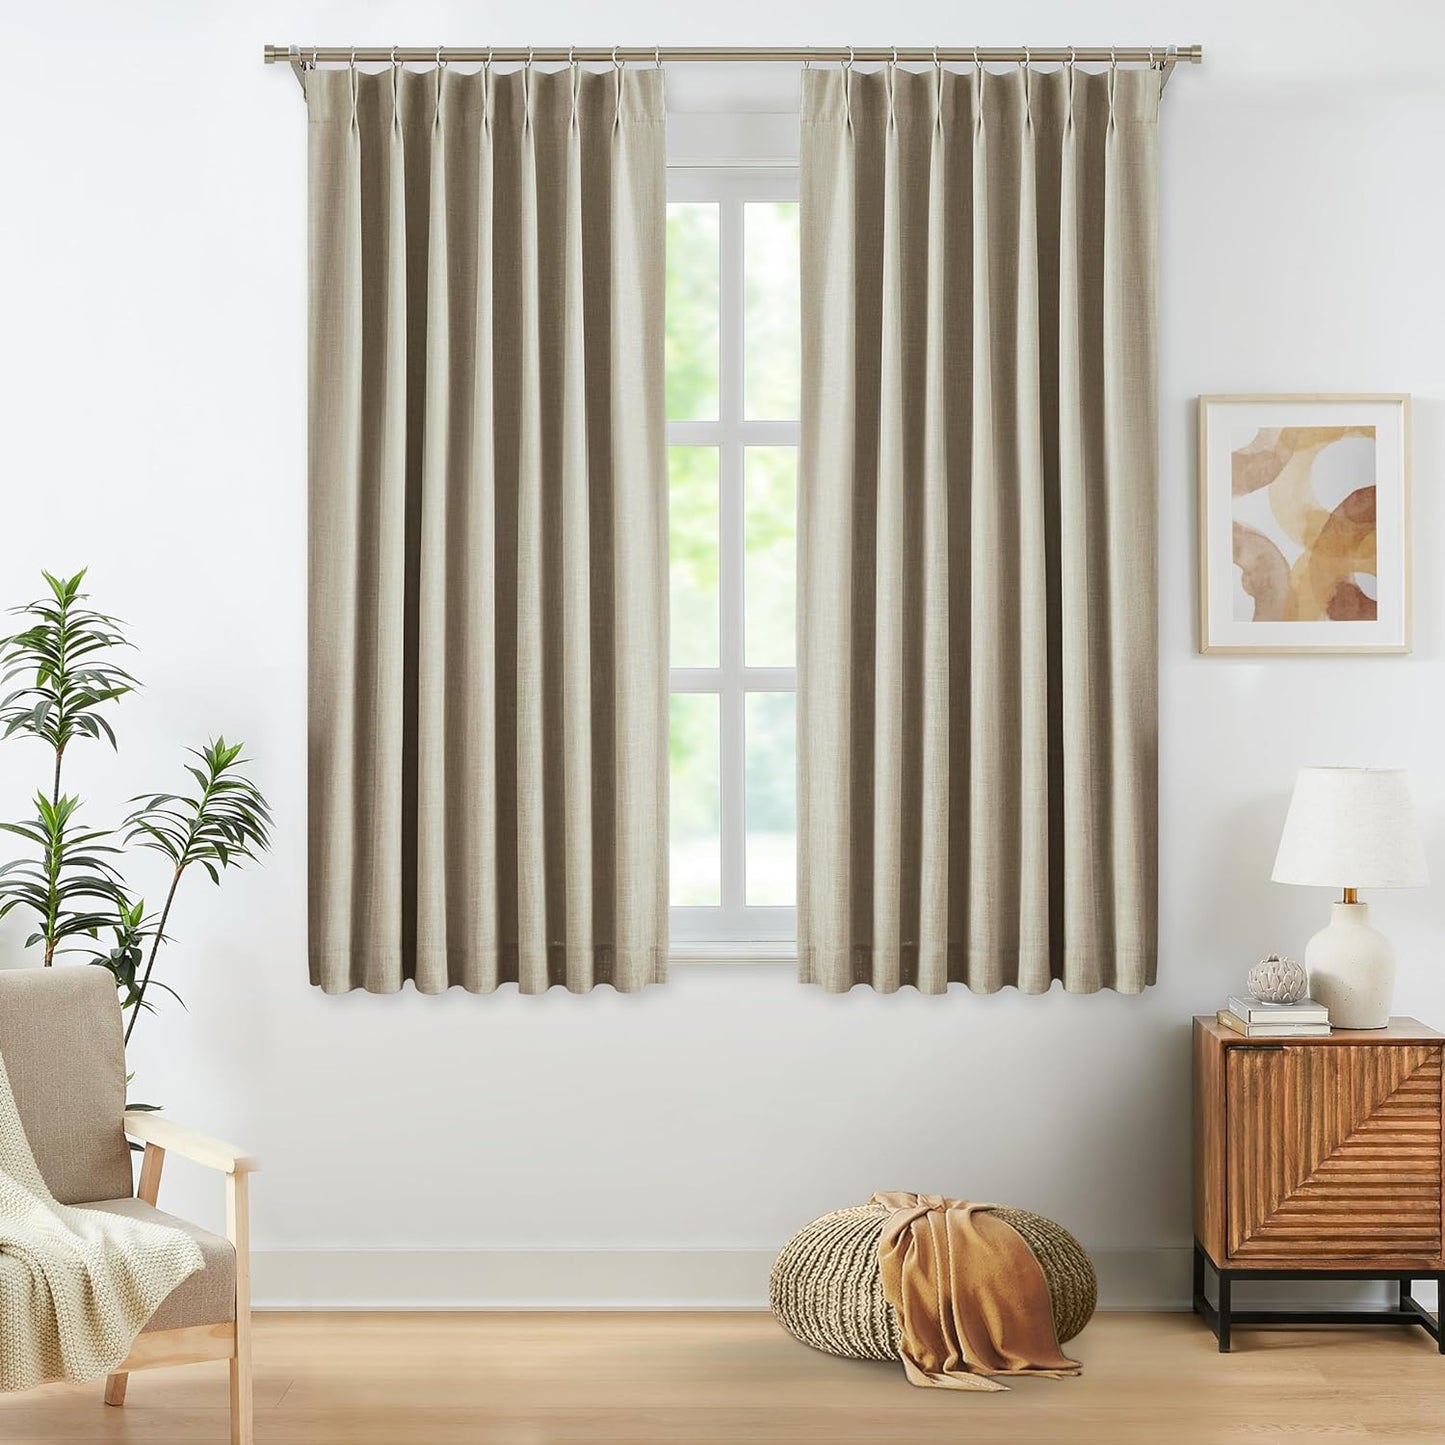 WEST LAKE Extra Long 9 Ft Bailey Linen Pinch Pleat Full Blackout Curtains 108 Inches Length,Natural Pinch Pleated Panels with Back Tabs,Rustic Window Treatment Bedroom Living Room,40"Wx108"Lx2,Natural  WEST LAKE Oatmeal Tan 40"X63"X2 